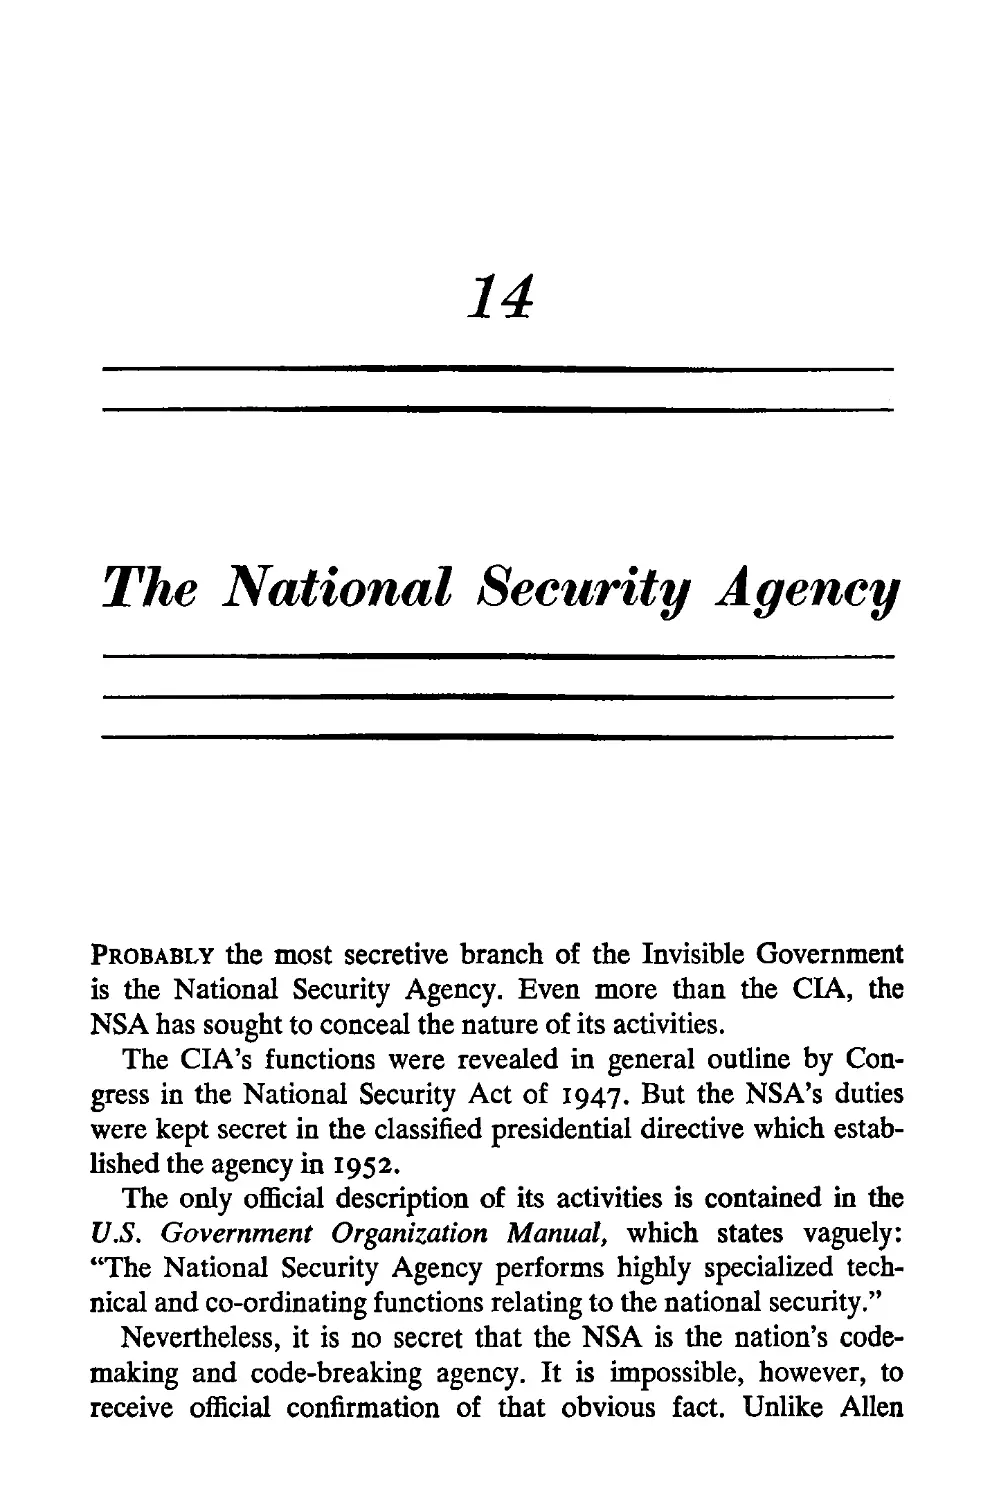 14. The National Security Agency